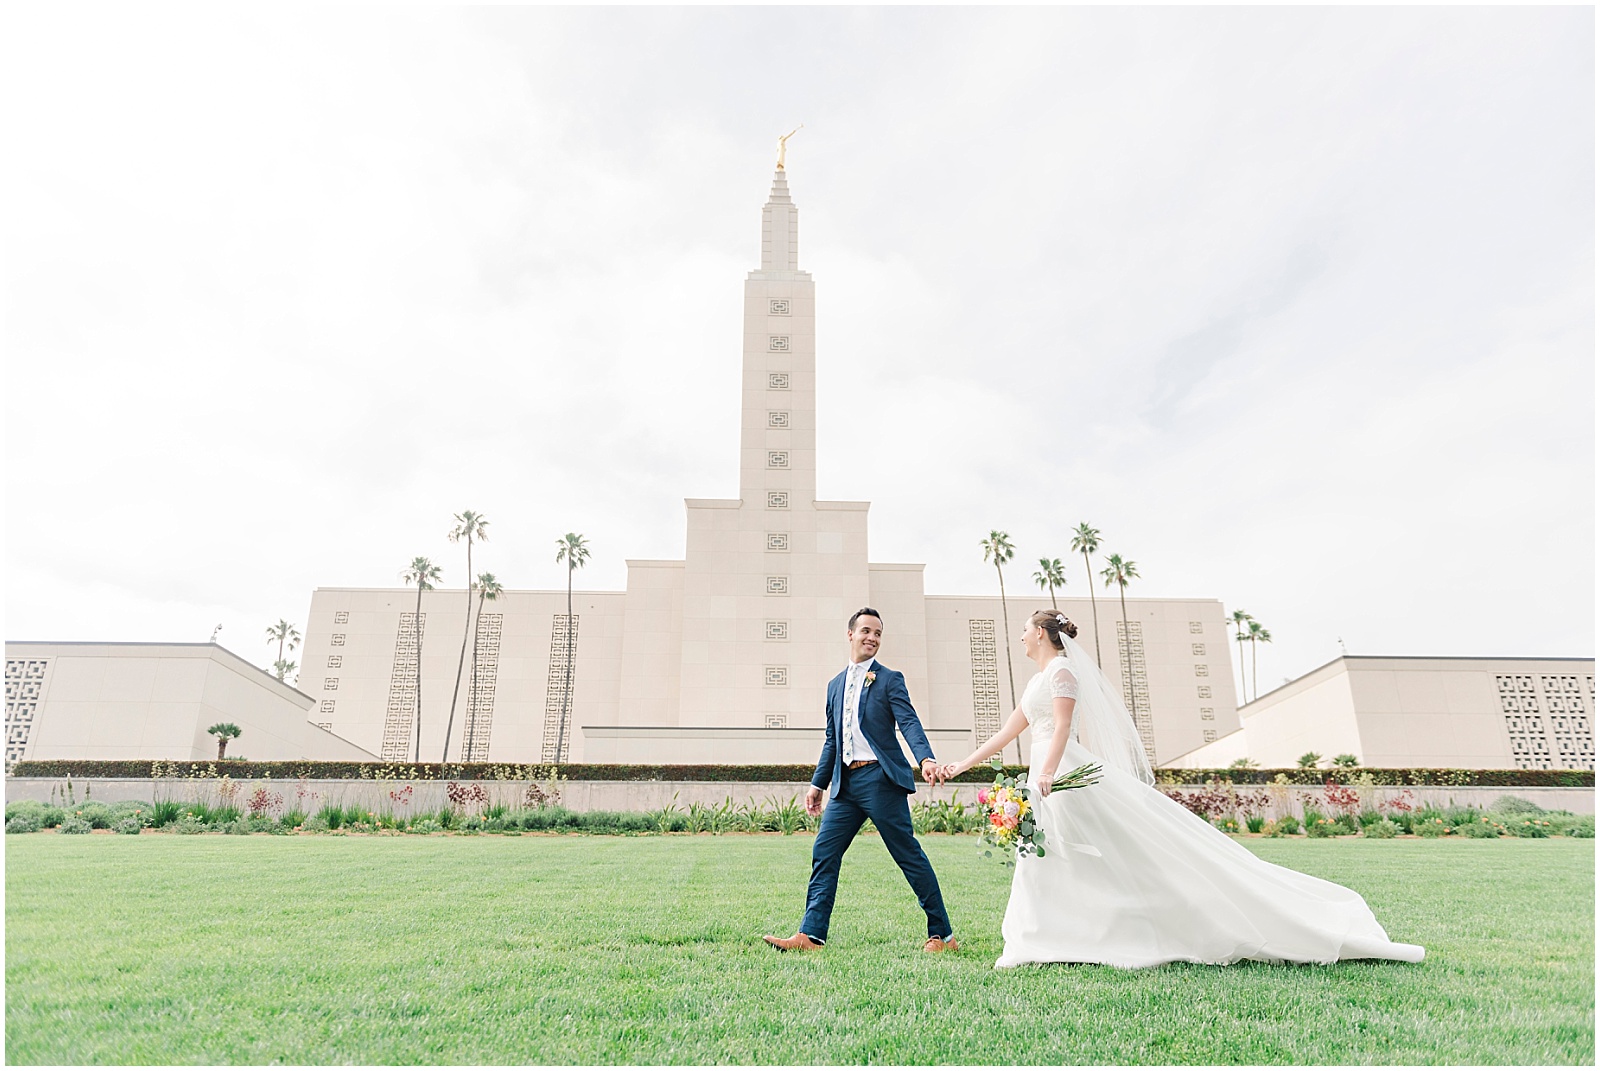 Los Angeles LDS Temple Wedding by Mollie Jane Photography.  To see more go to www.molliejanephotography.com